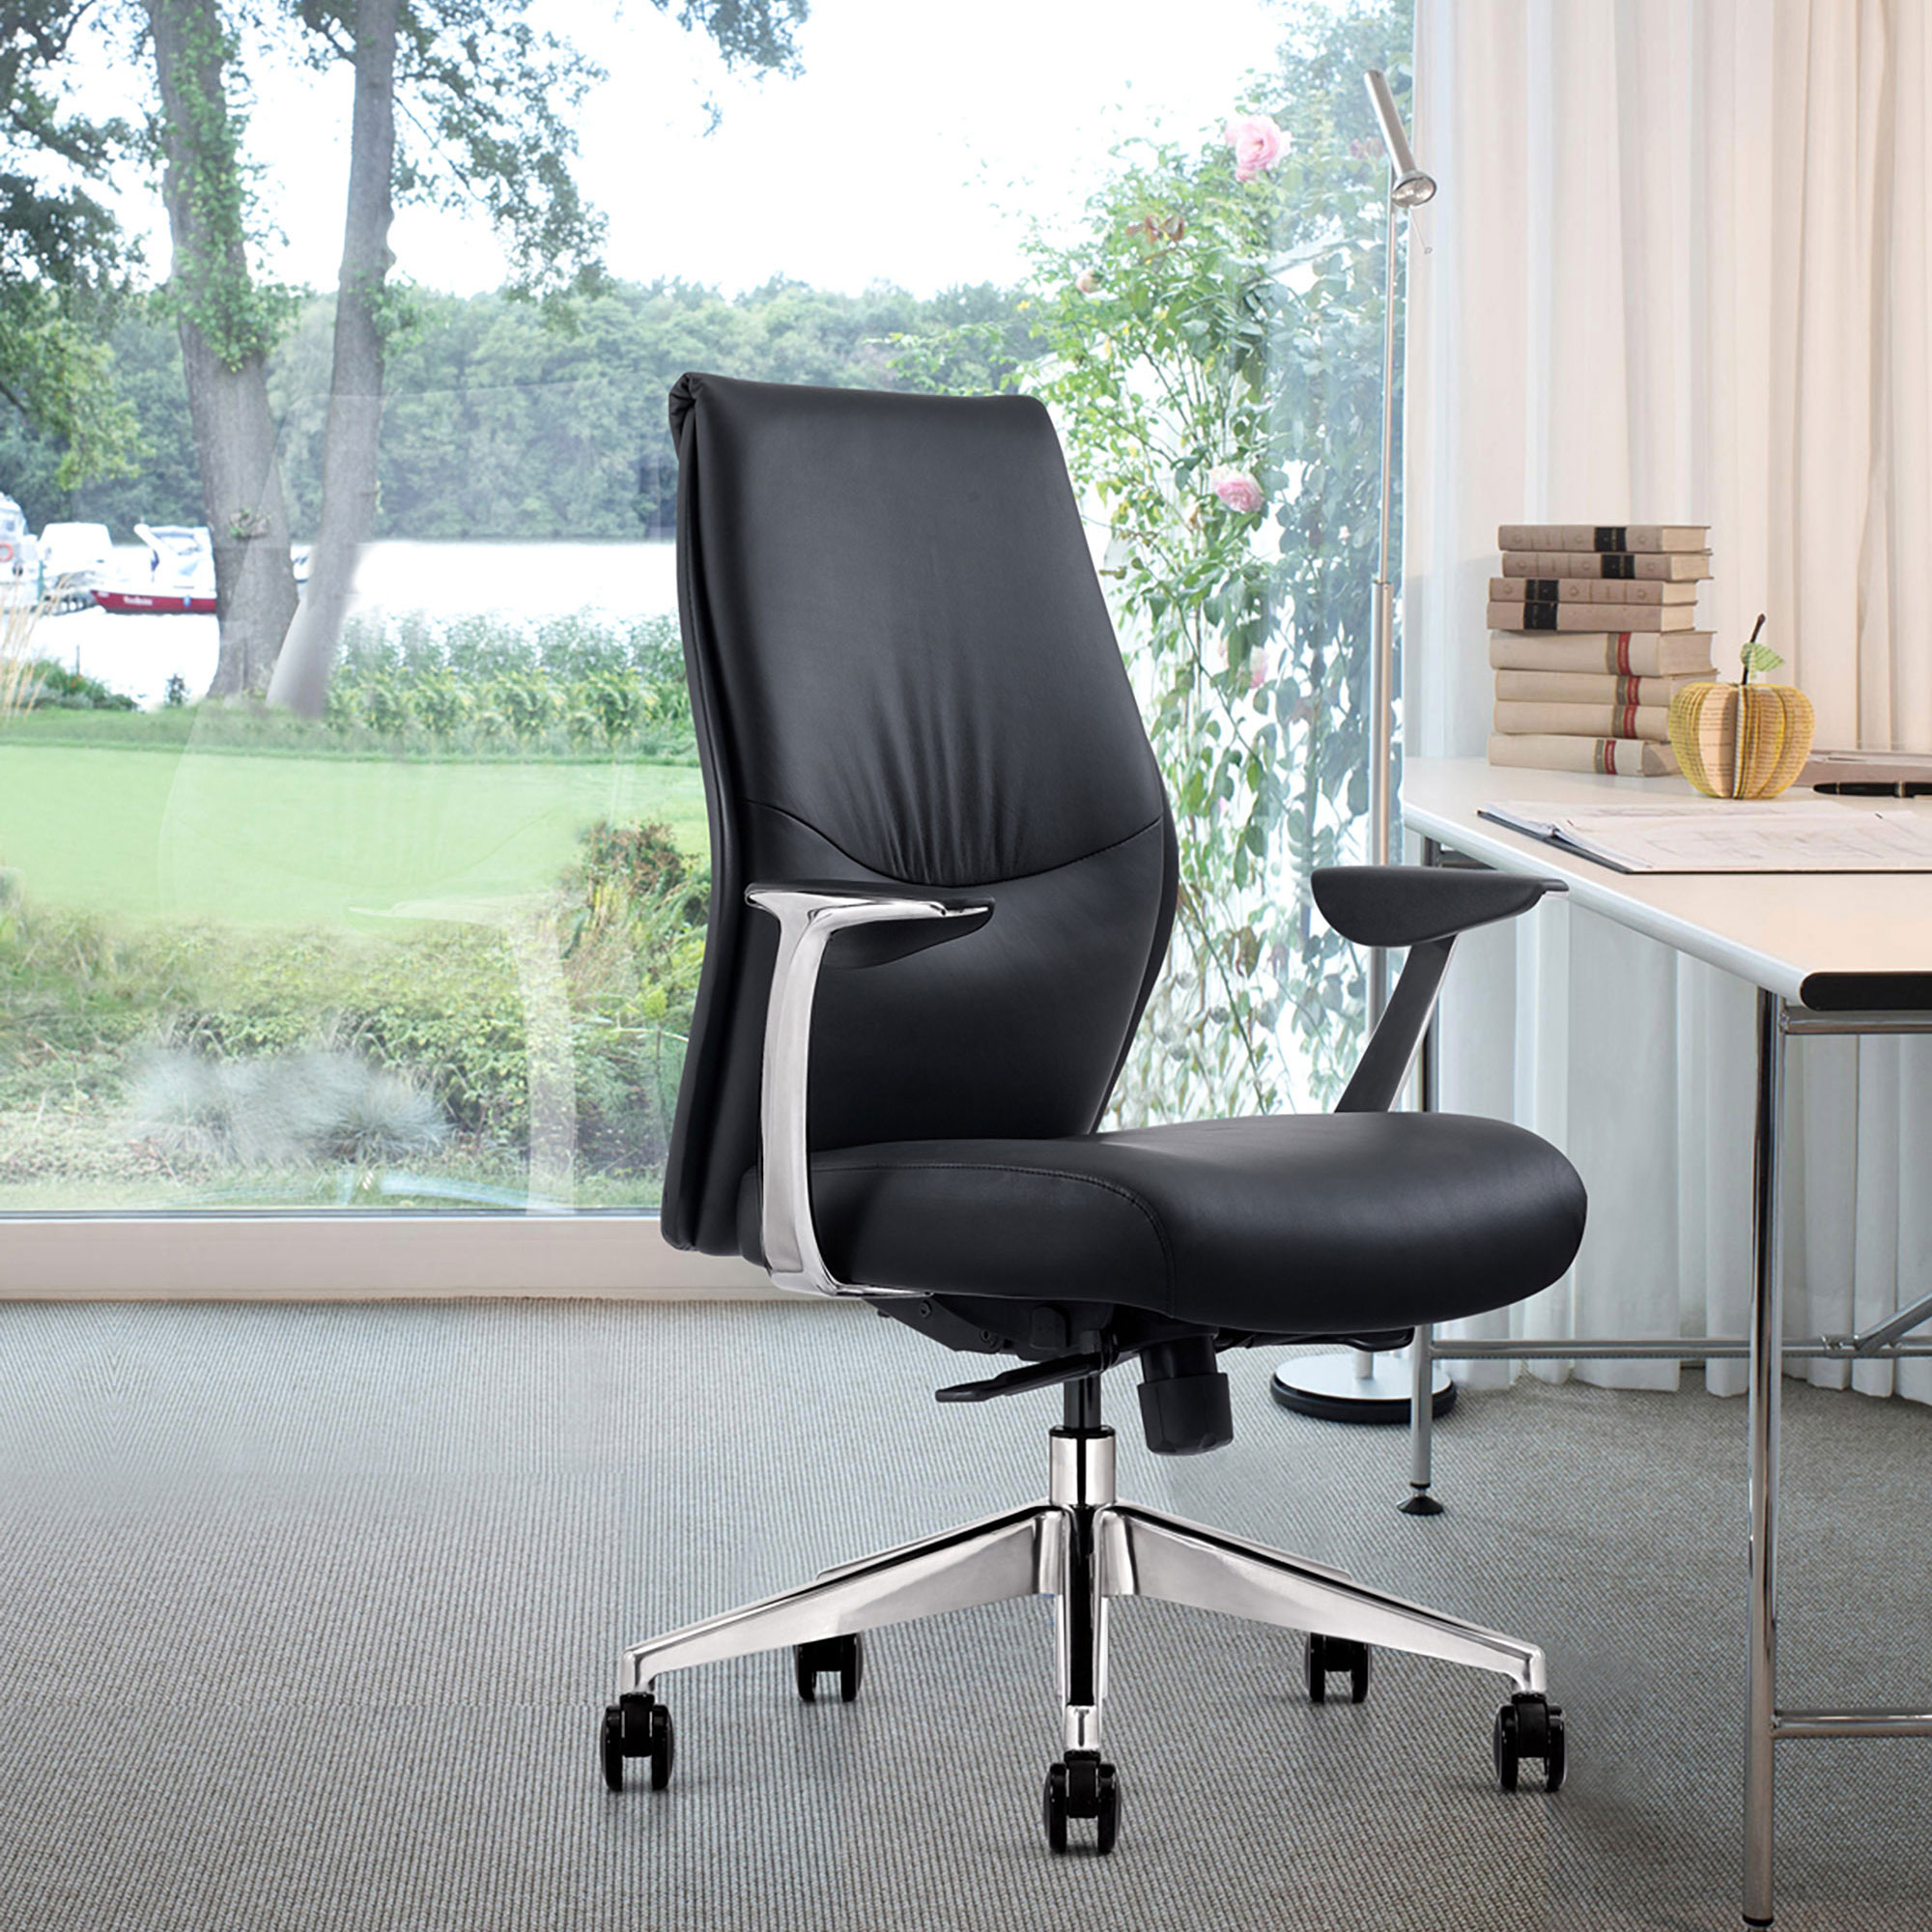 Most Comfortable Office Chair - Buzz Seating Home Office